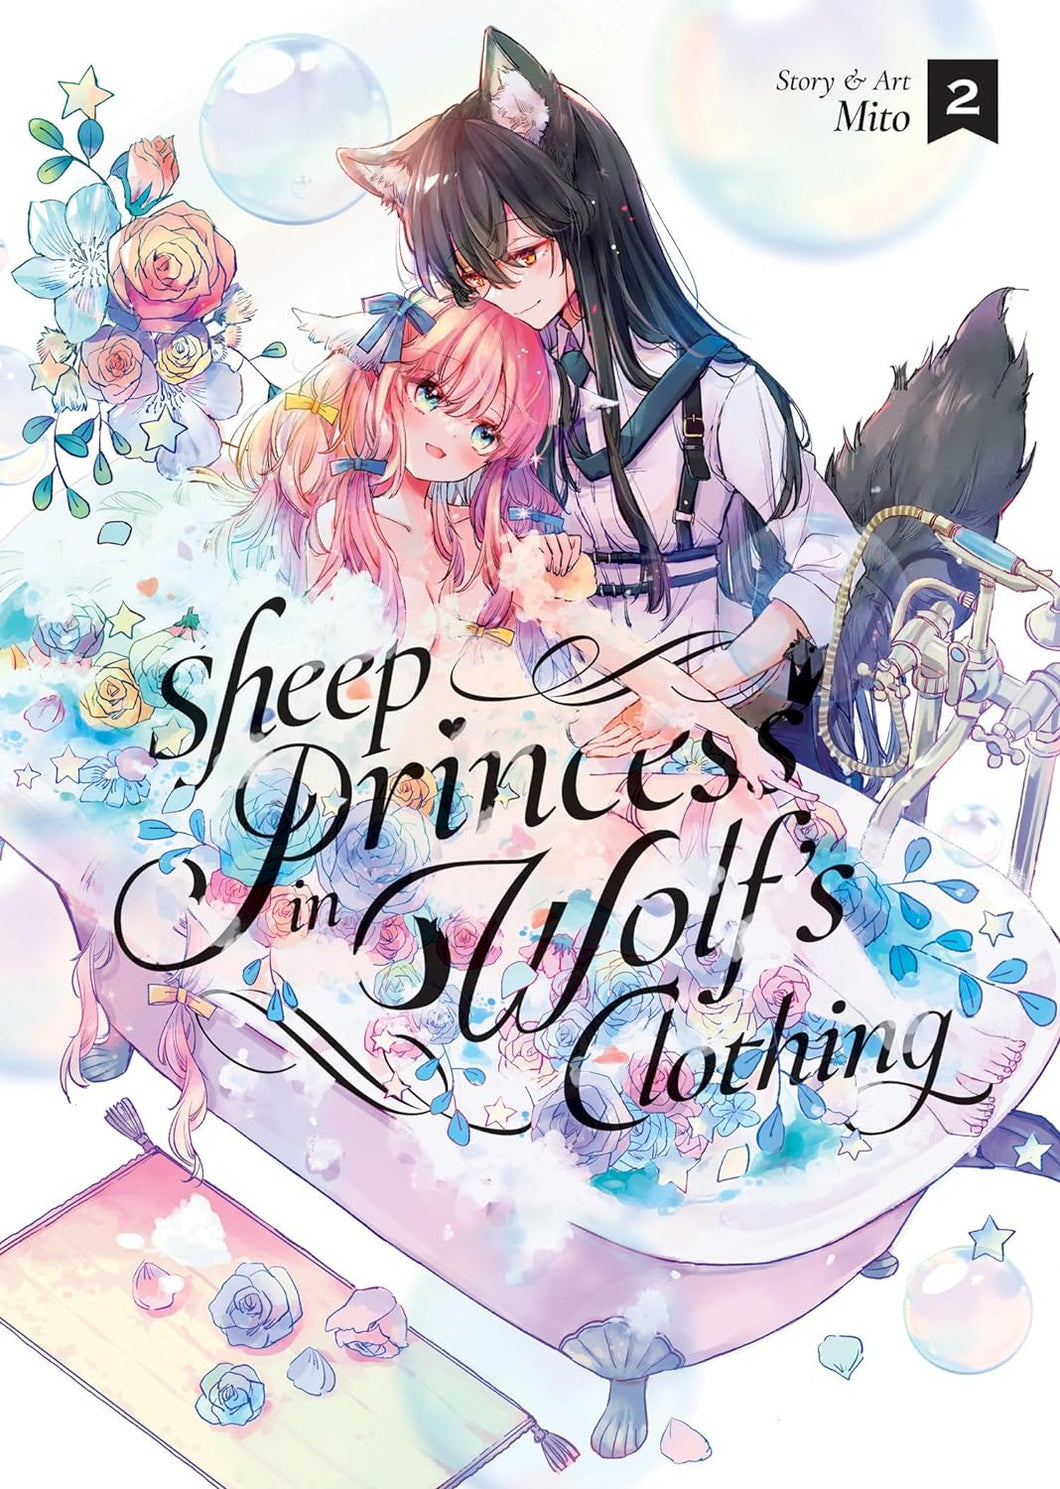 Sheep Princess in Wolf’s Clothing Volume 2